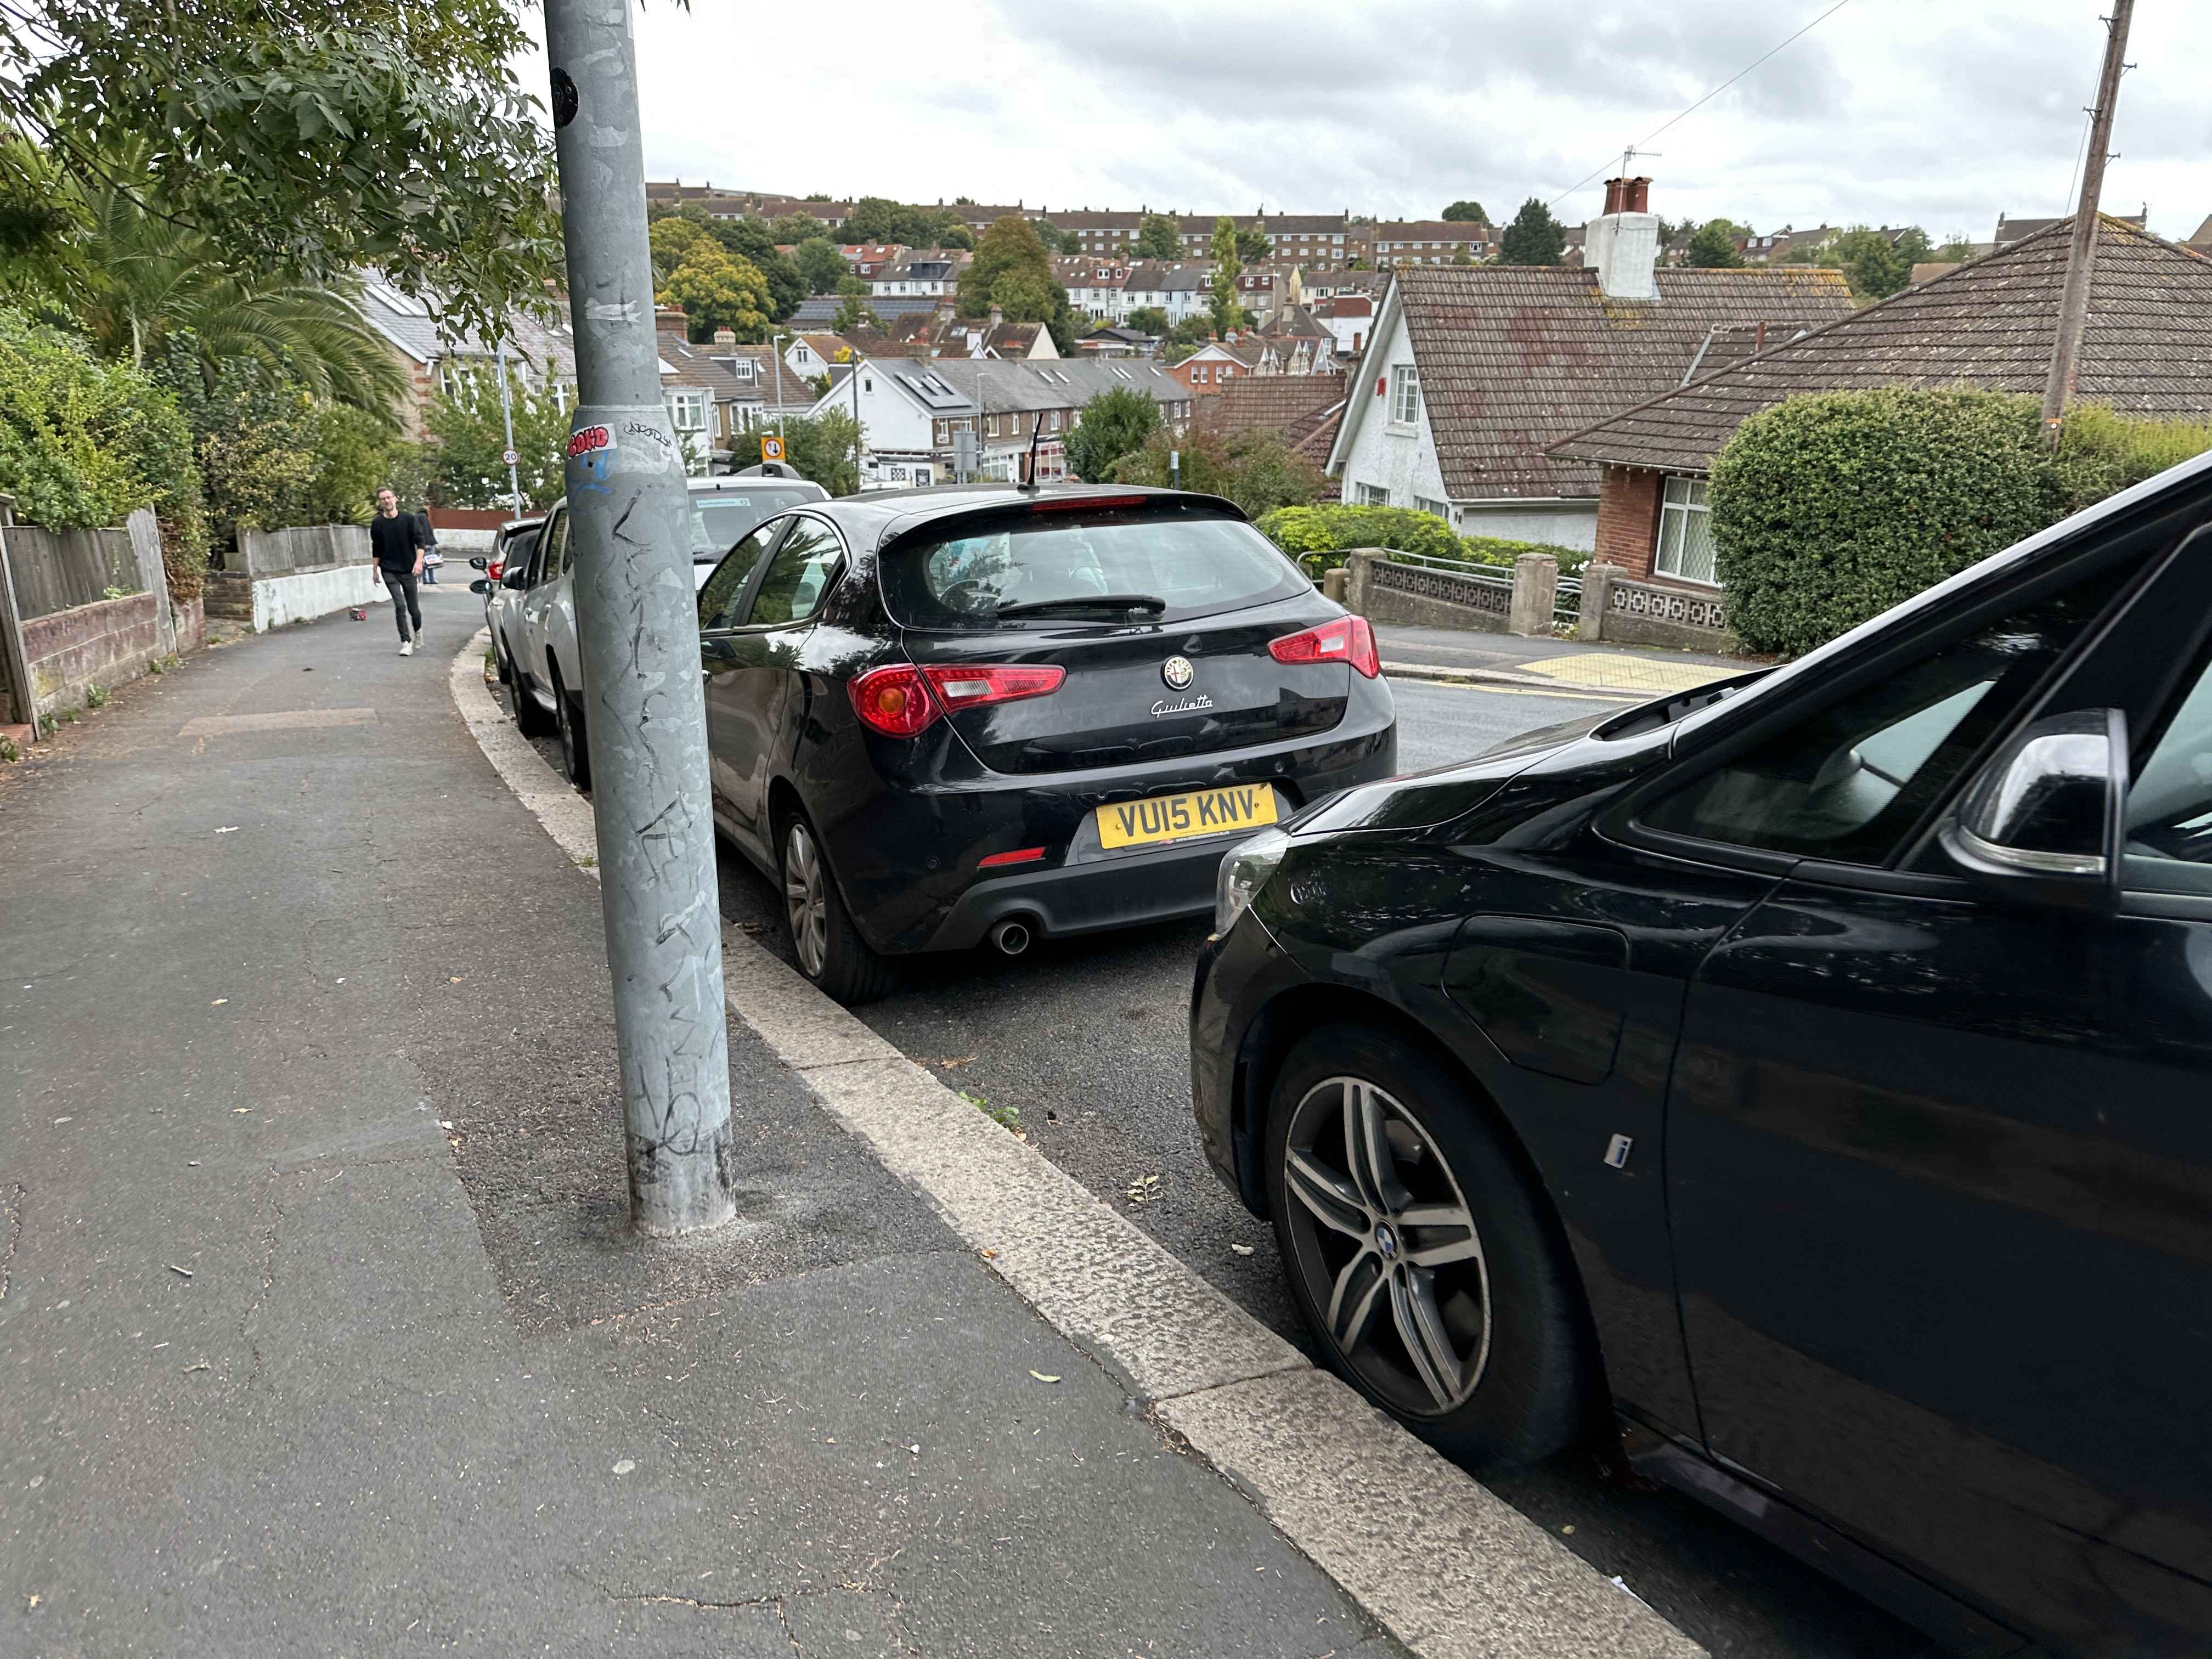 Photograph of VU15 KNV - a Black Alfa Romeo Giulietta parked in Hollingdean by a non-resident. The fourth of ten photographs supplied by the residents of Hollingdean.